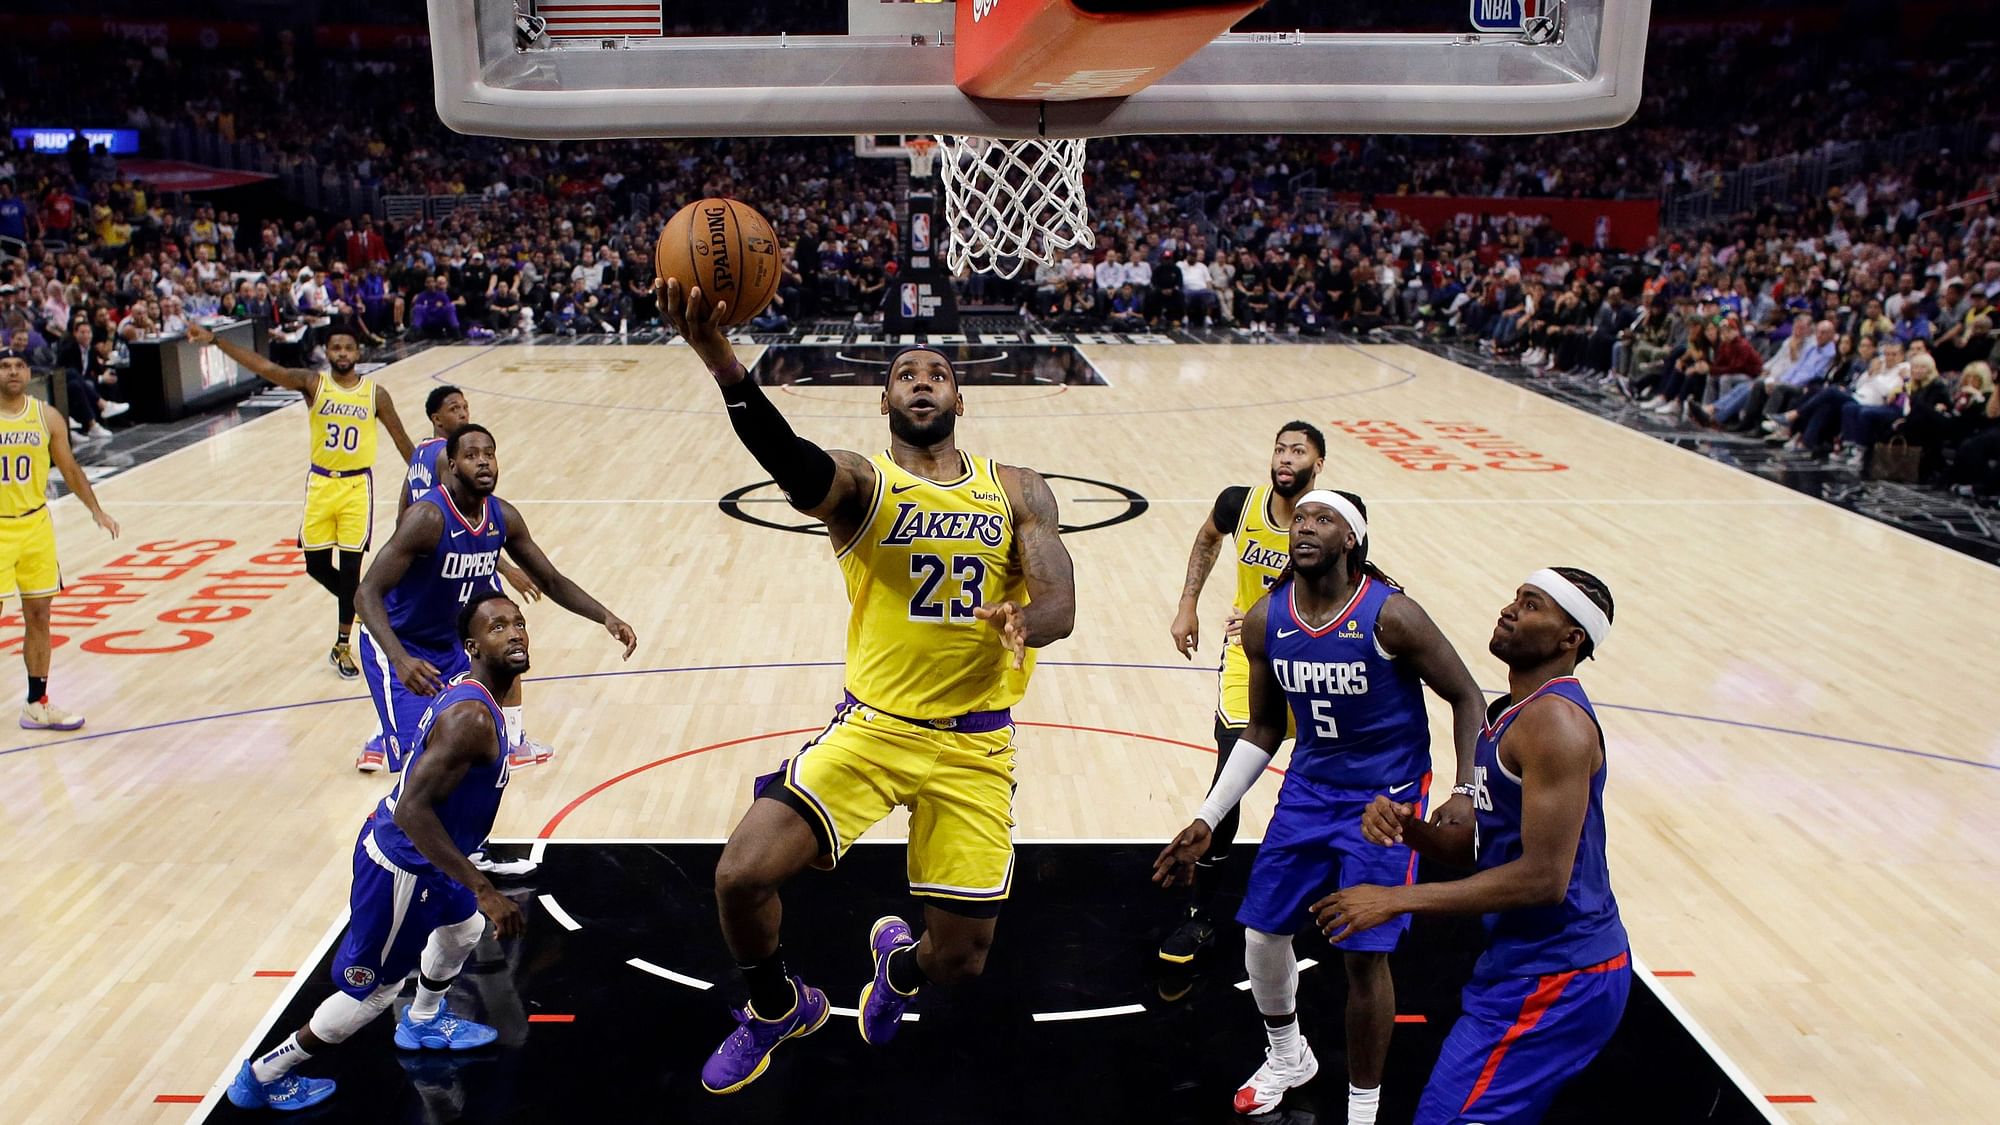 Los Angeles Lakers’ LeBron James, center, drives to the basket against the Los Angeles Clippers during the second half of an NBA basketball game Tuesday, Oct. 22, 2019, in Los Angeles.